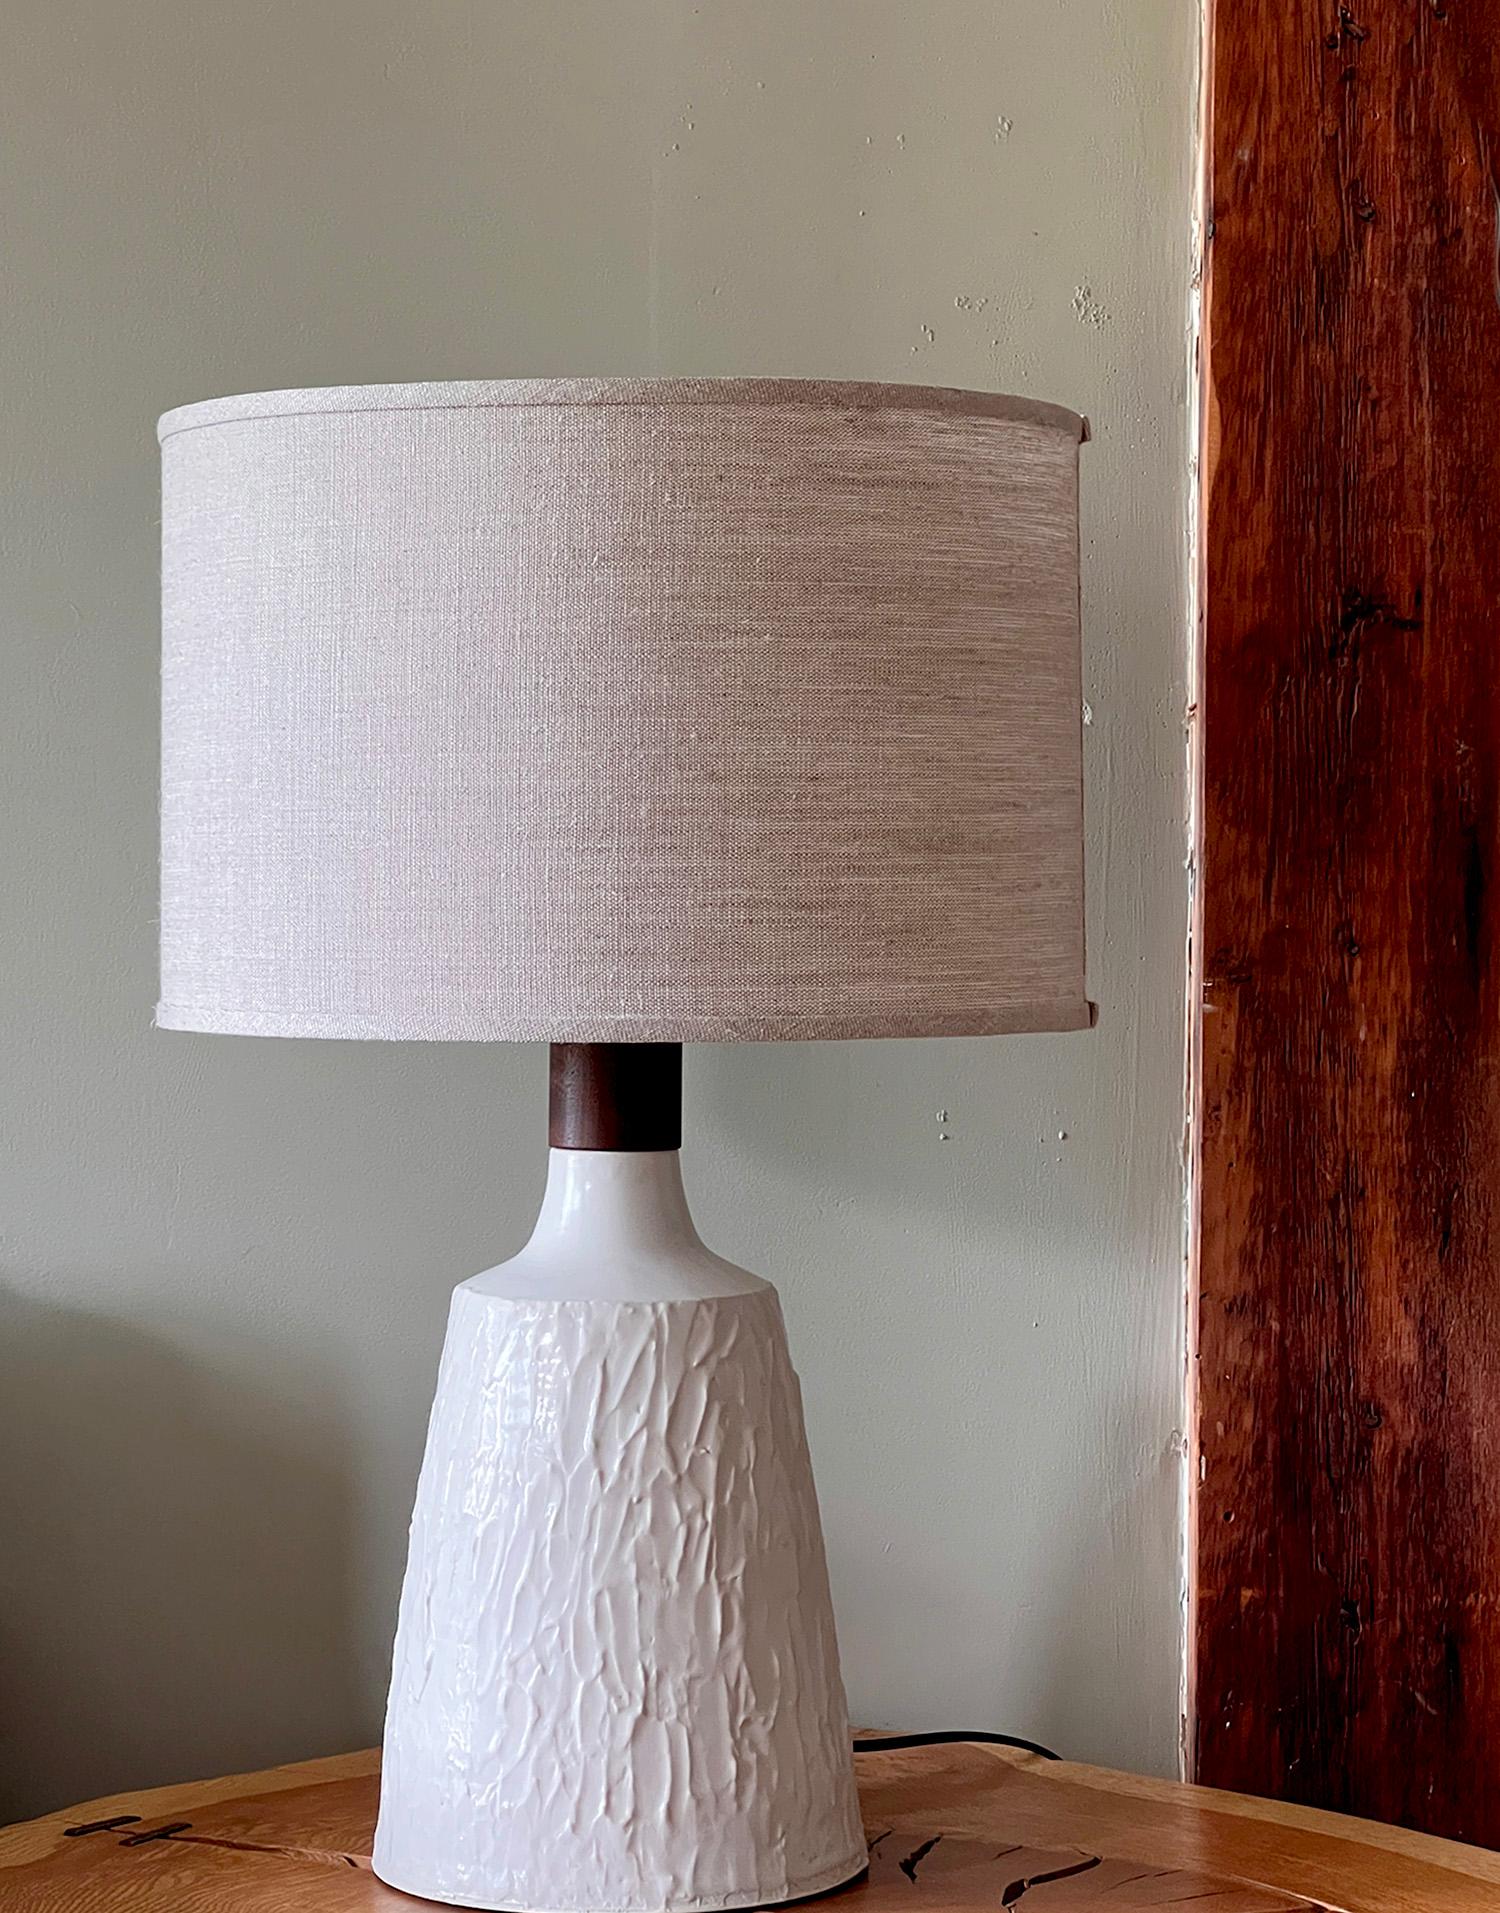 American One of a Kind Handmade Textured Porcelain and Walnut Table Lamp